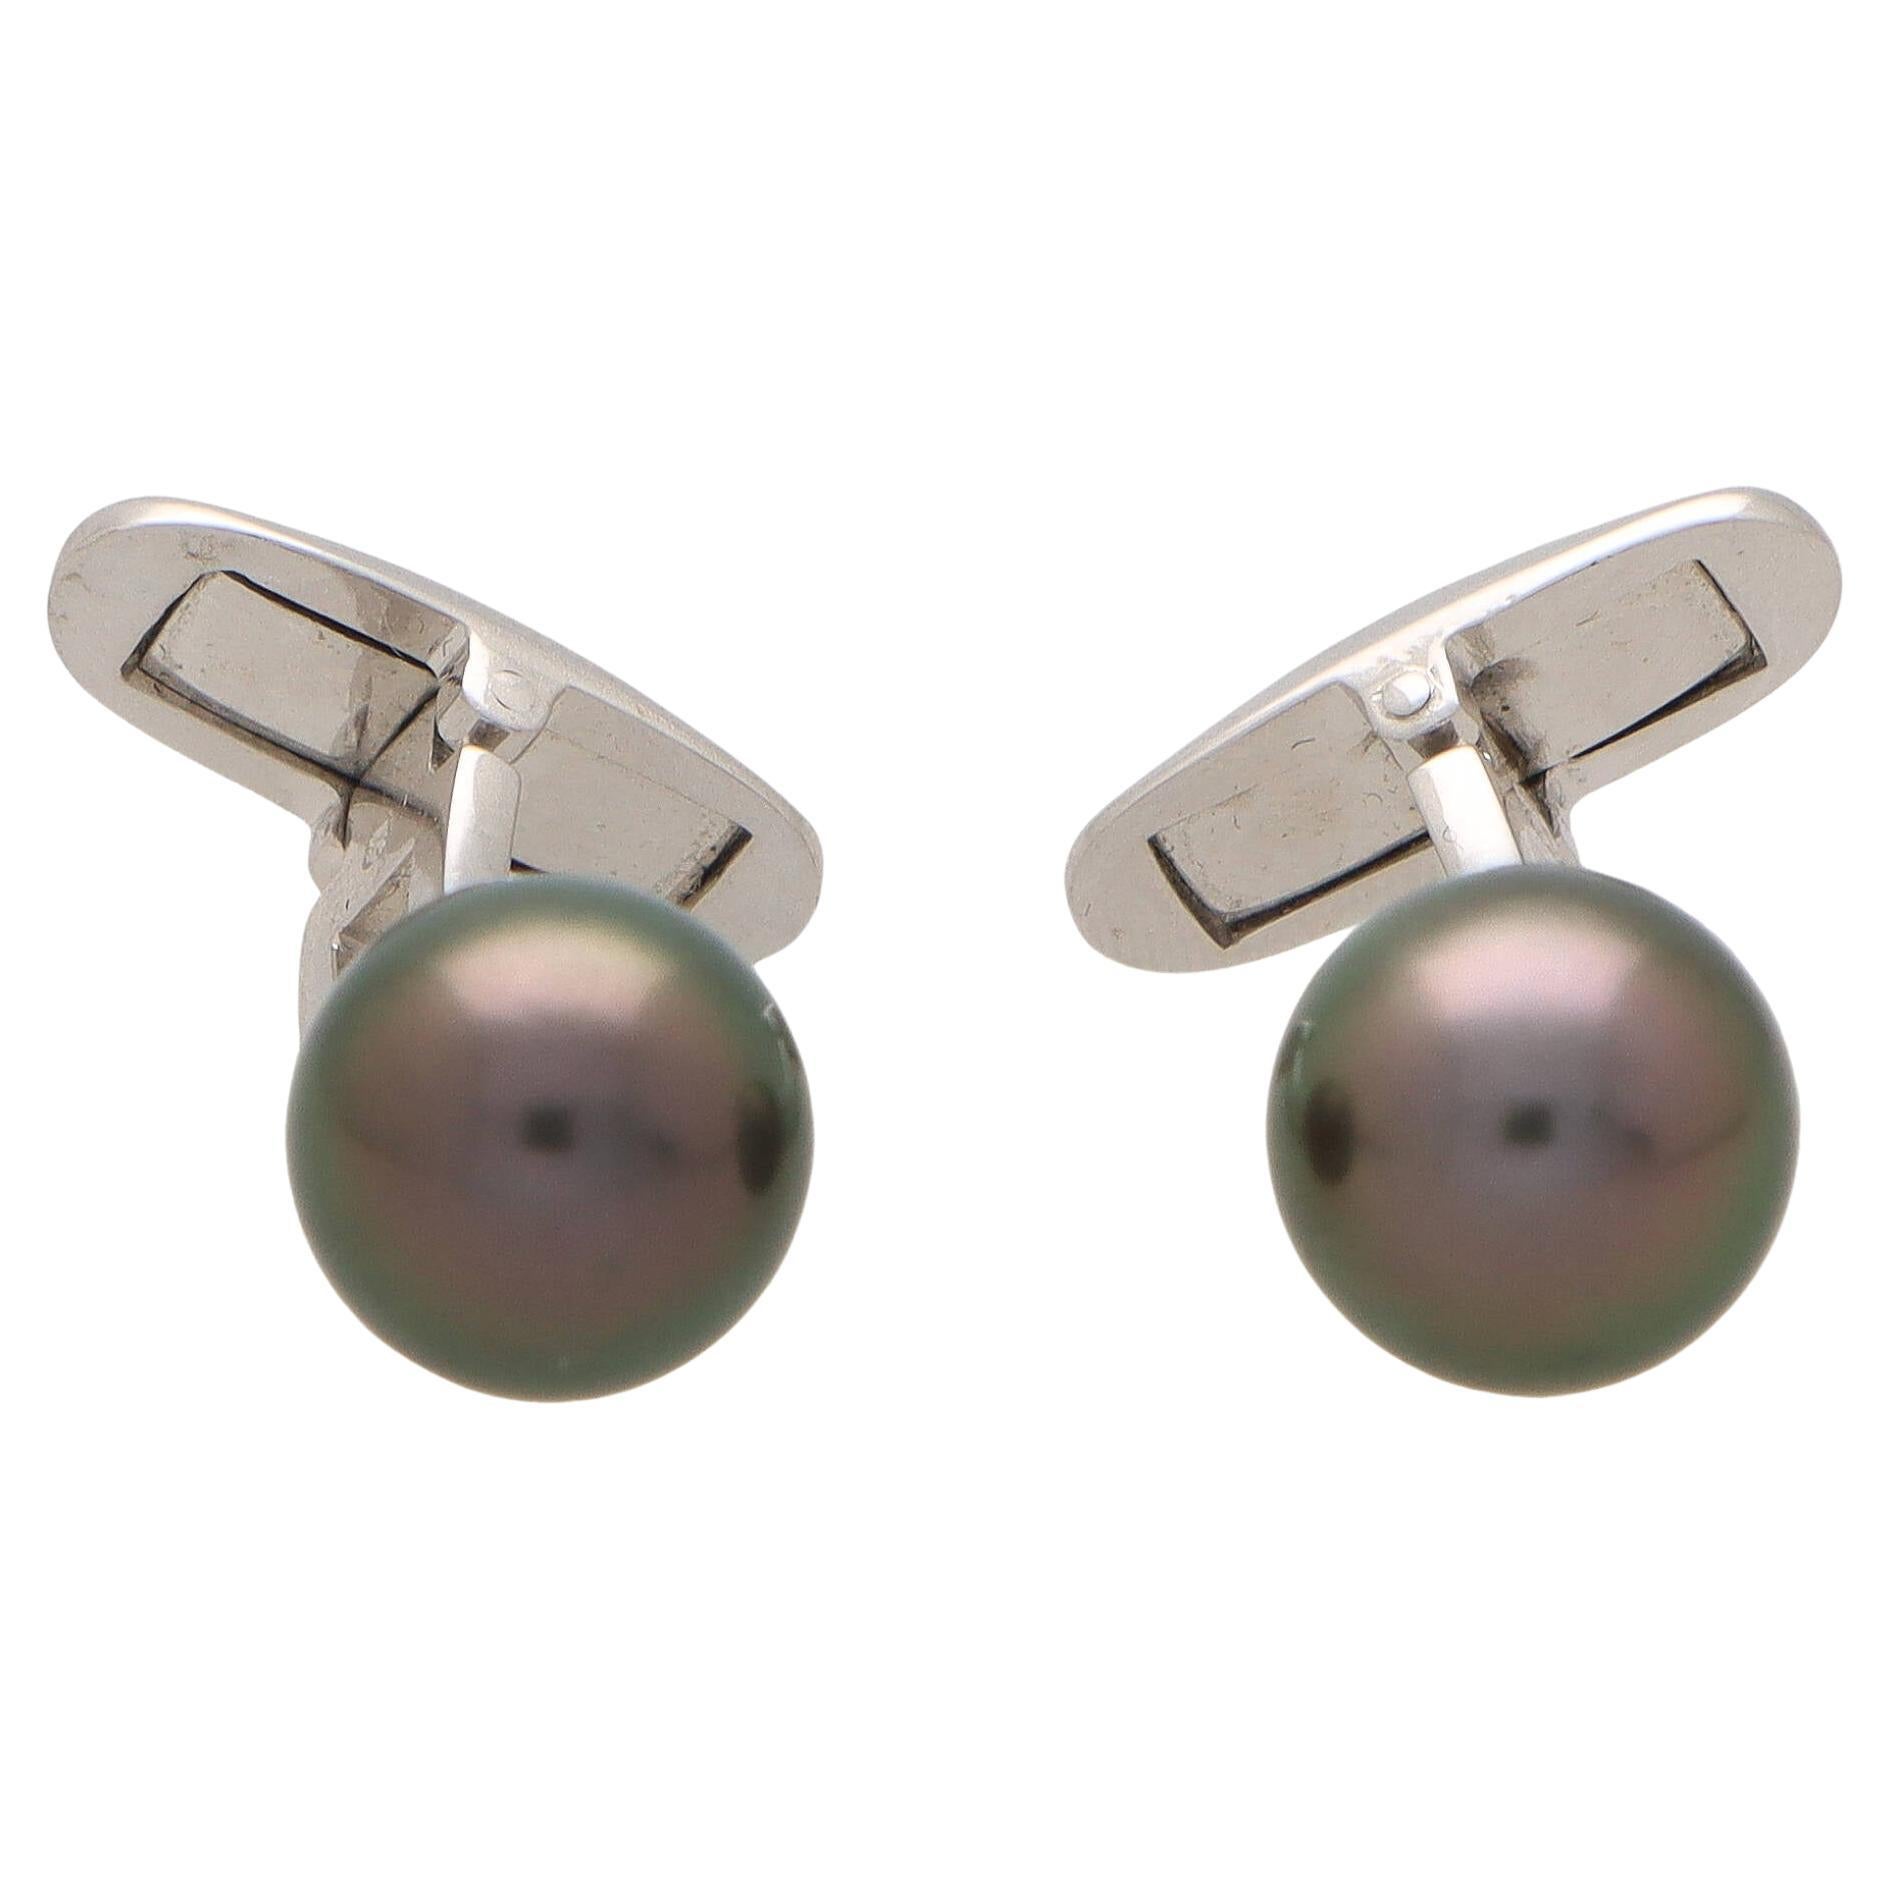  Vintage Mikimoto Tahitian Pearl Swivel Back Cufflinks in 18k White Gold For Sale